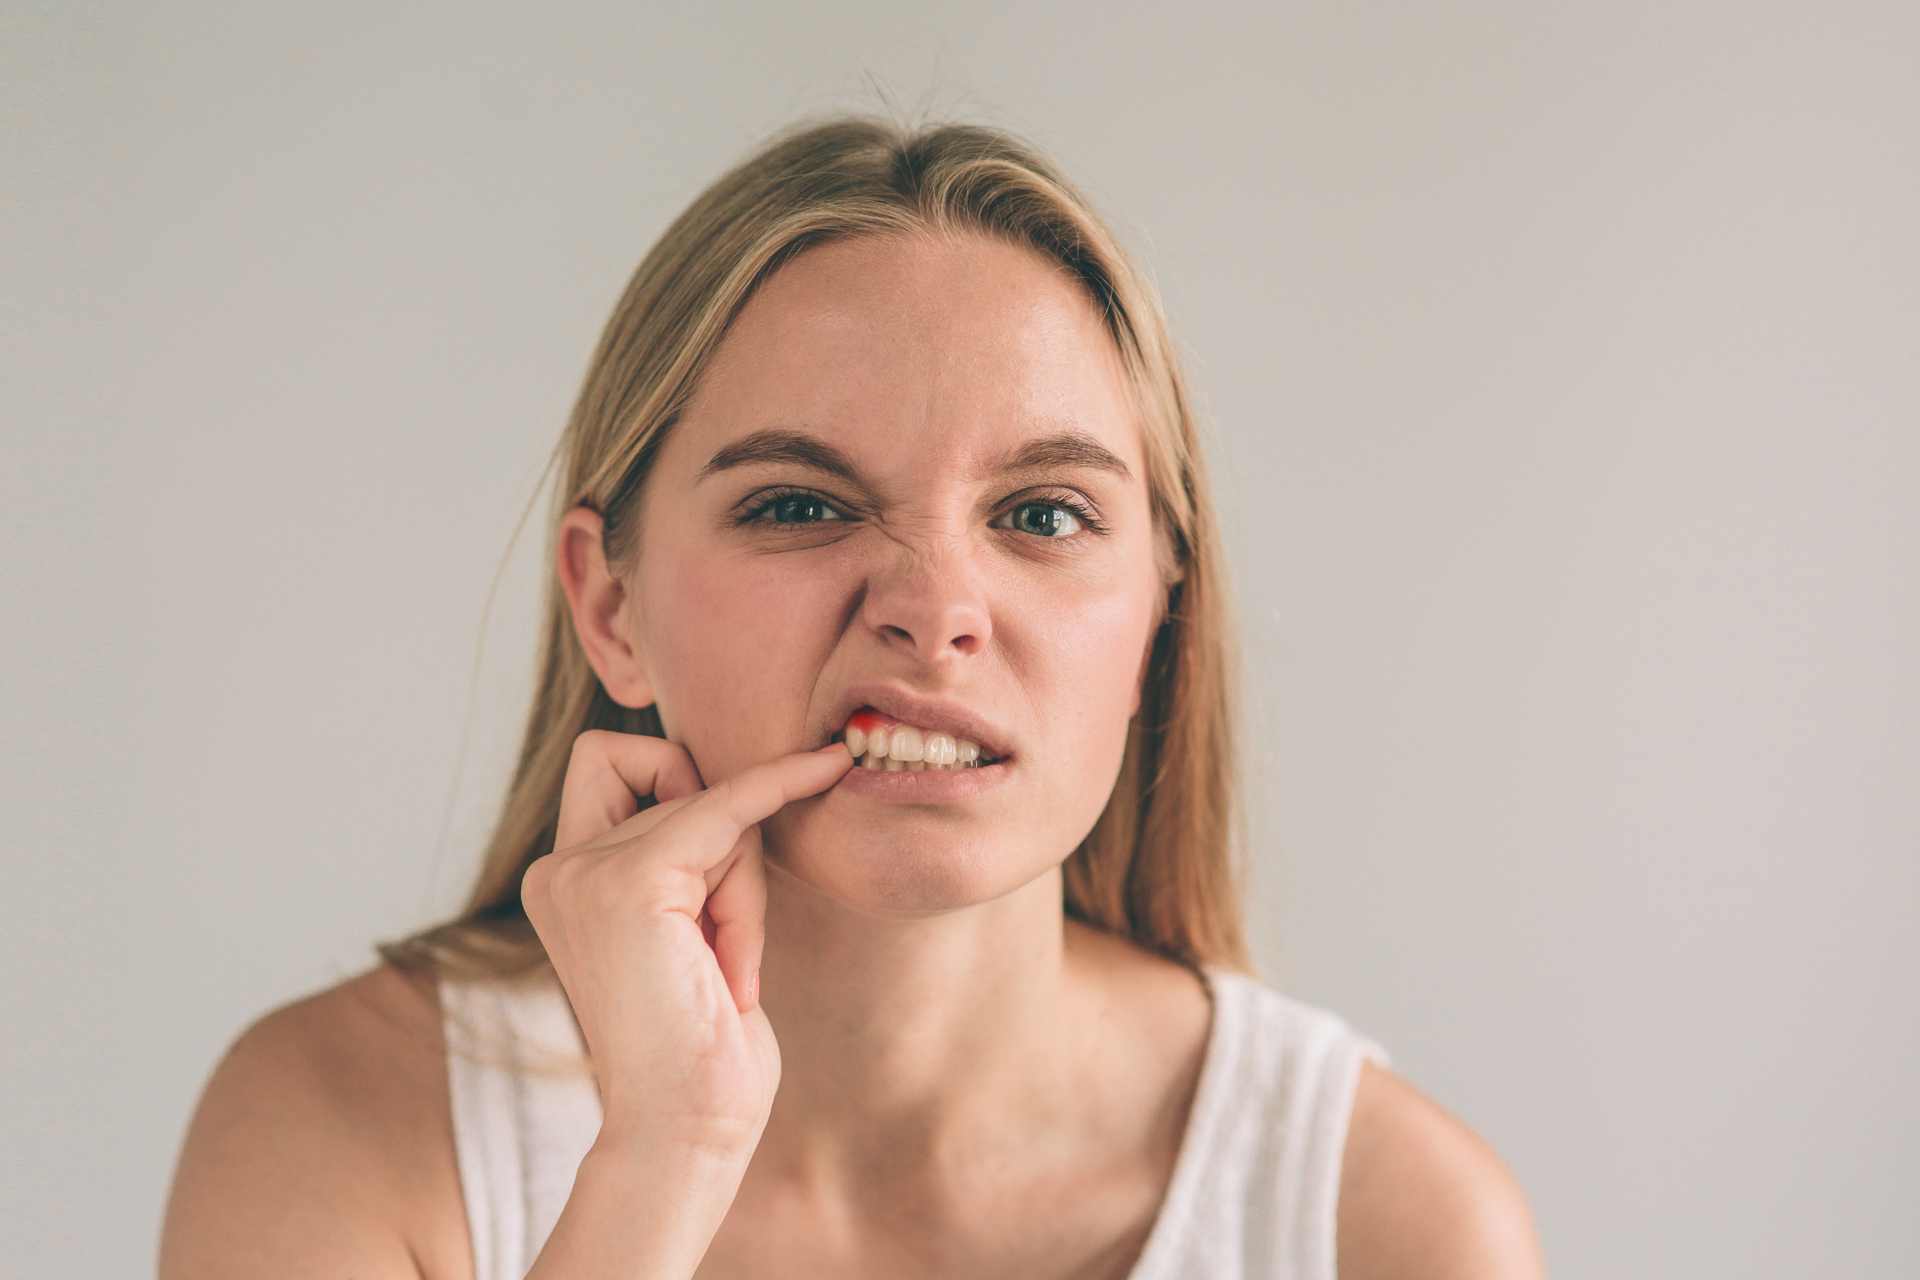 01 A young woman concerned about whether she has receding gums on a single tooth